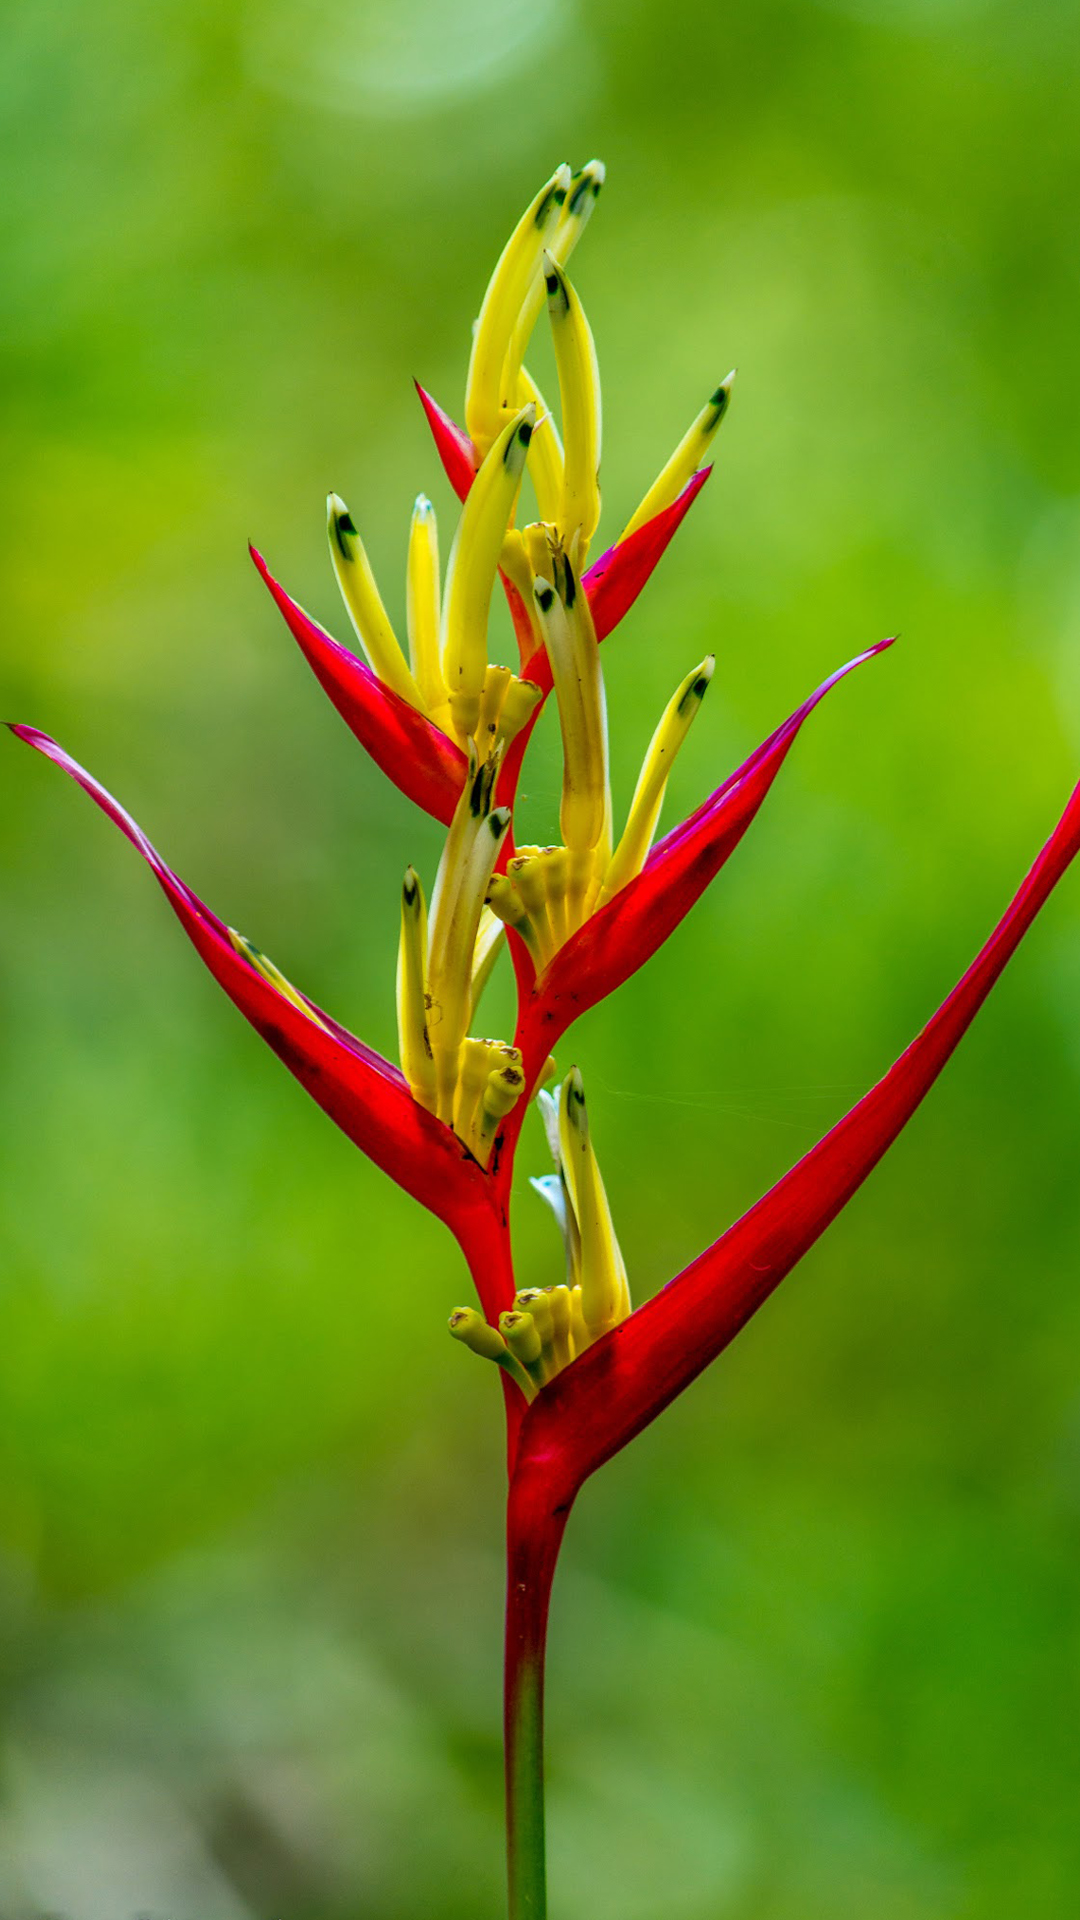 5.5 inch hd wallpaper,flower,bird of paradise,plant,heliconia,botany